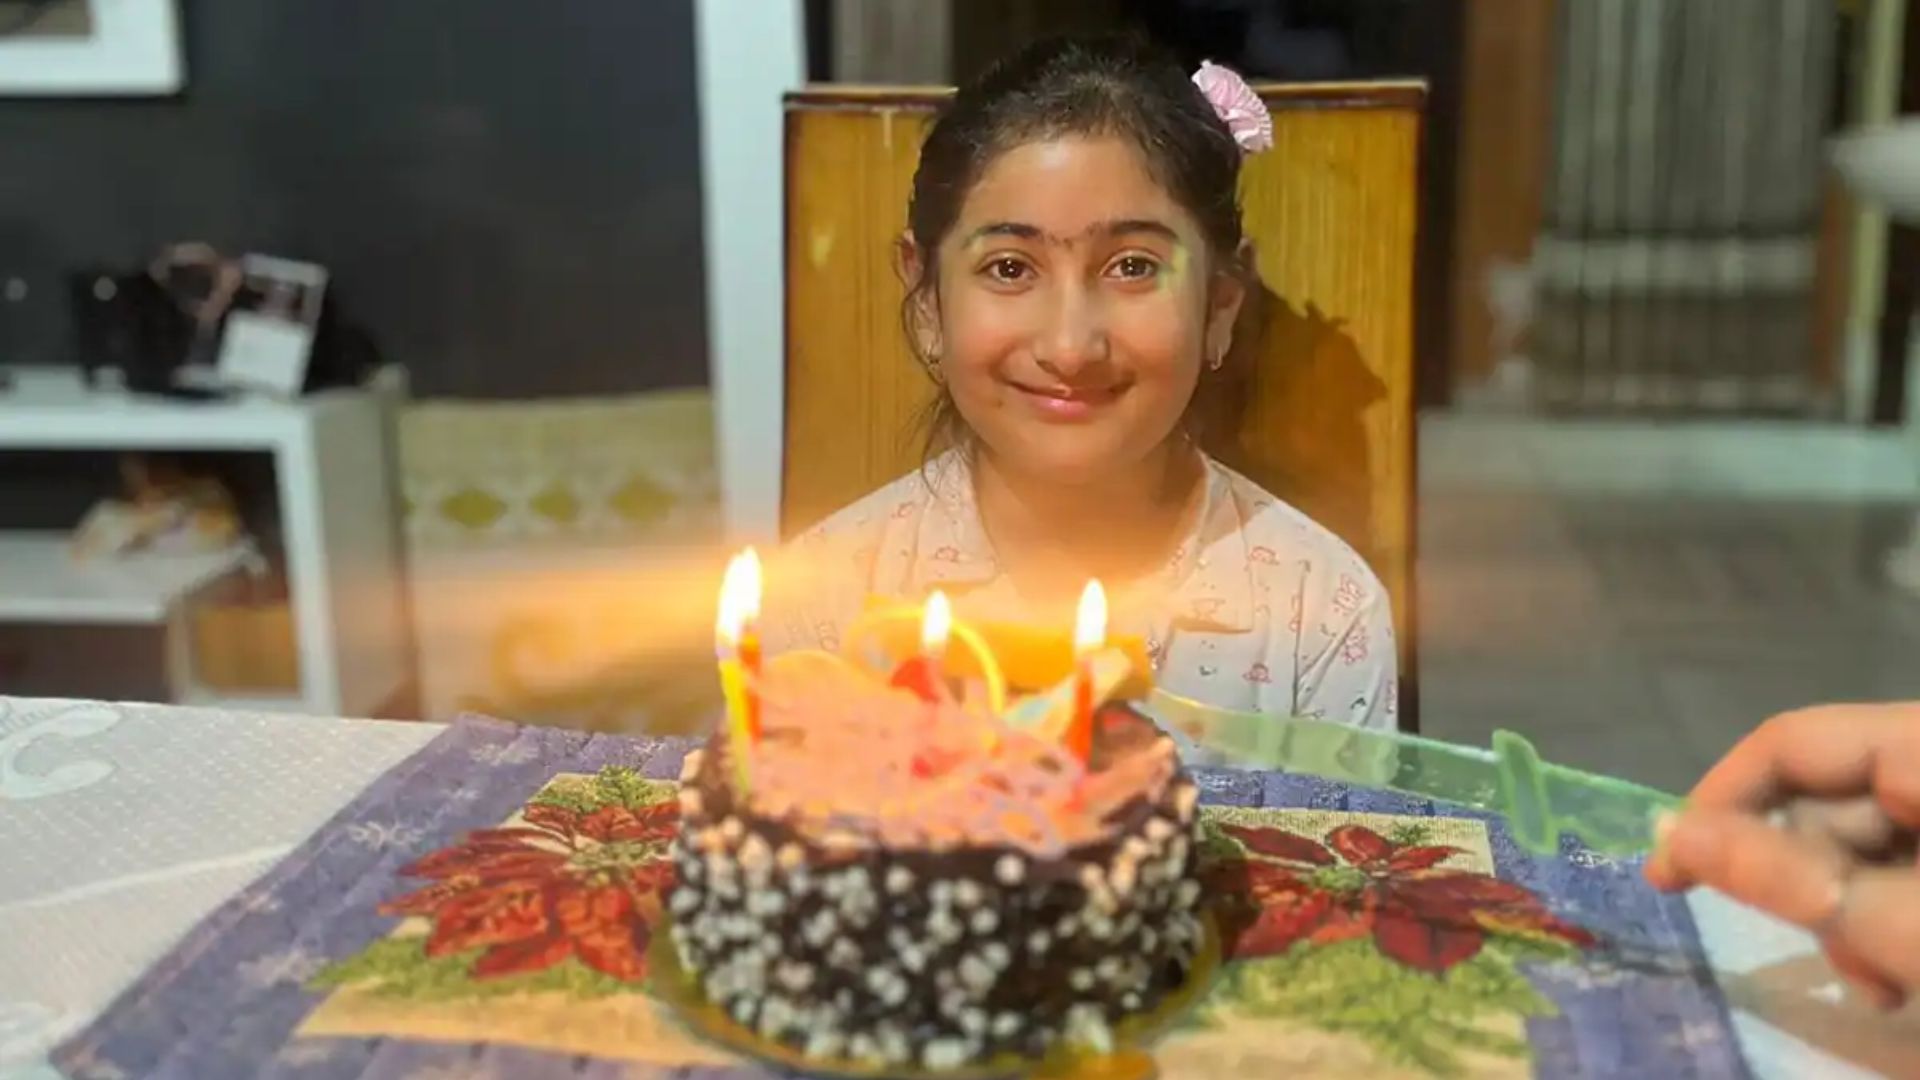 10-year-old dies after eating poisonous birthday cake